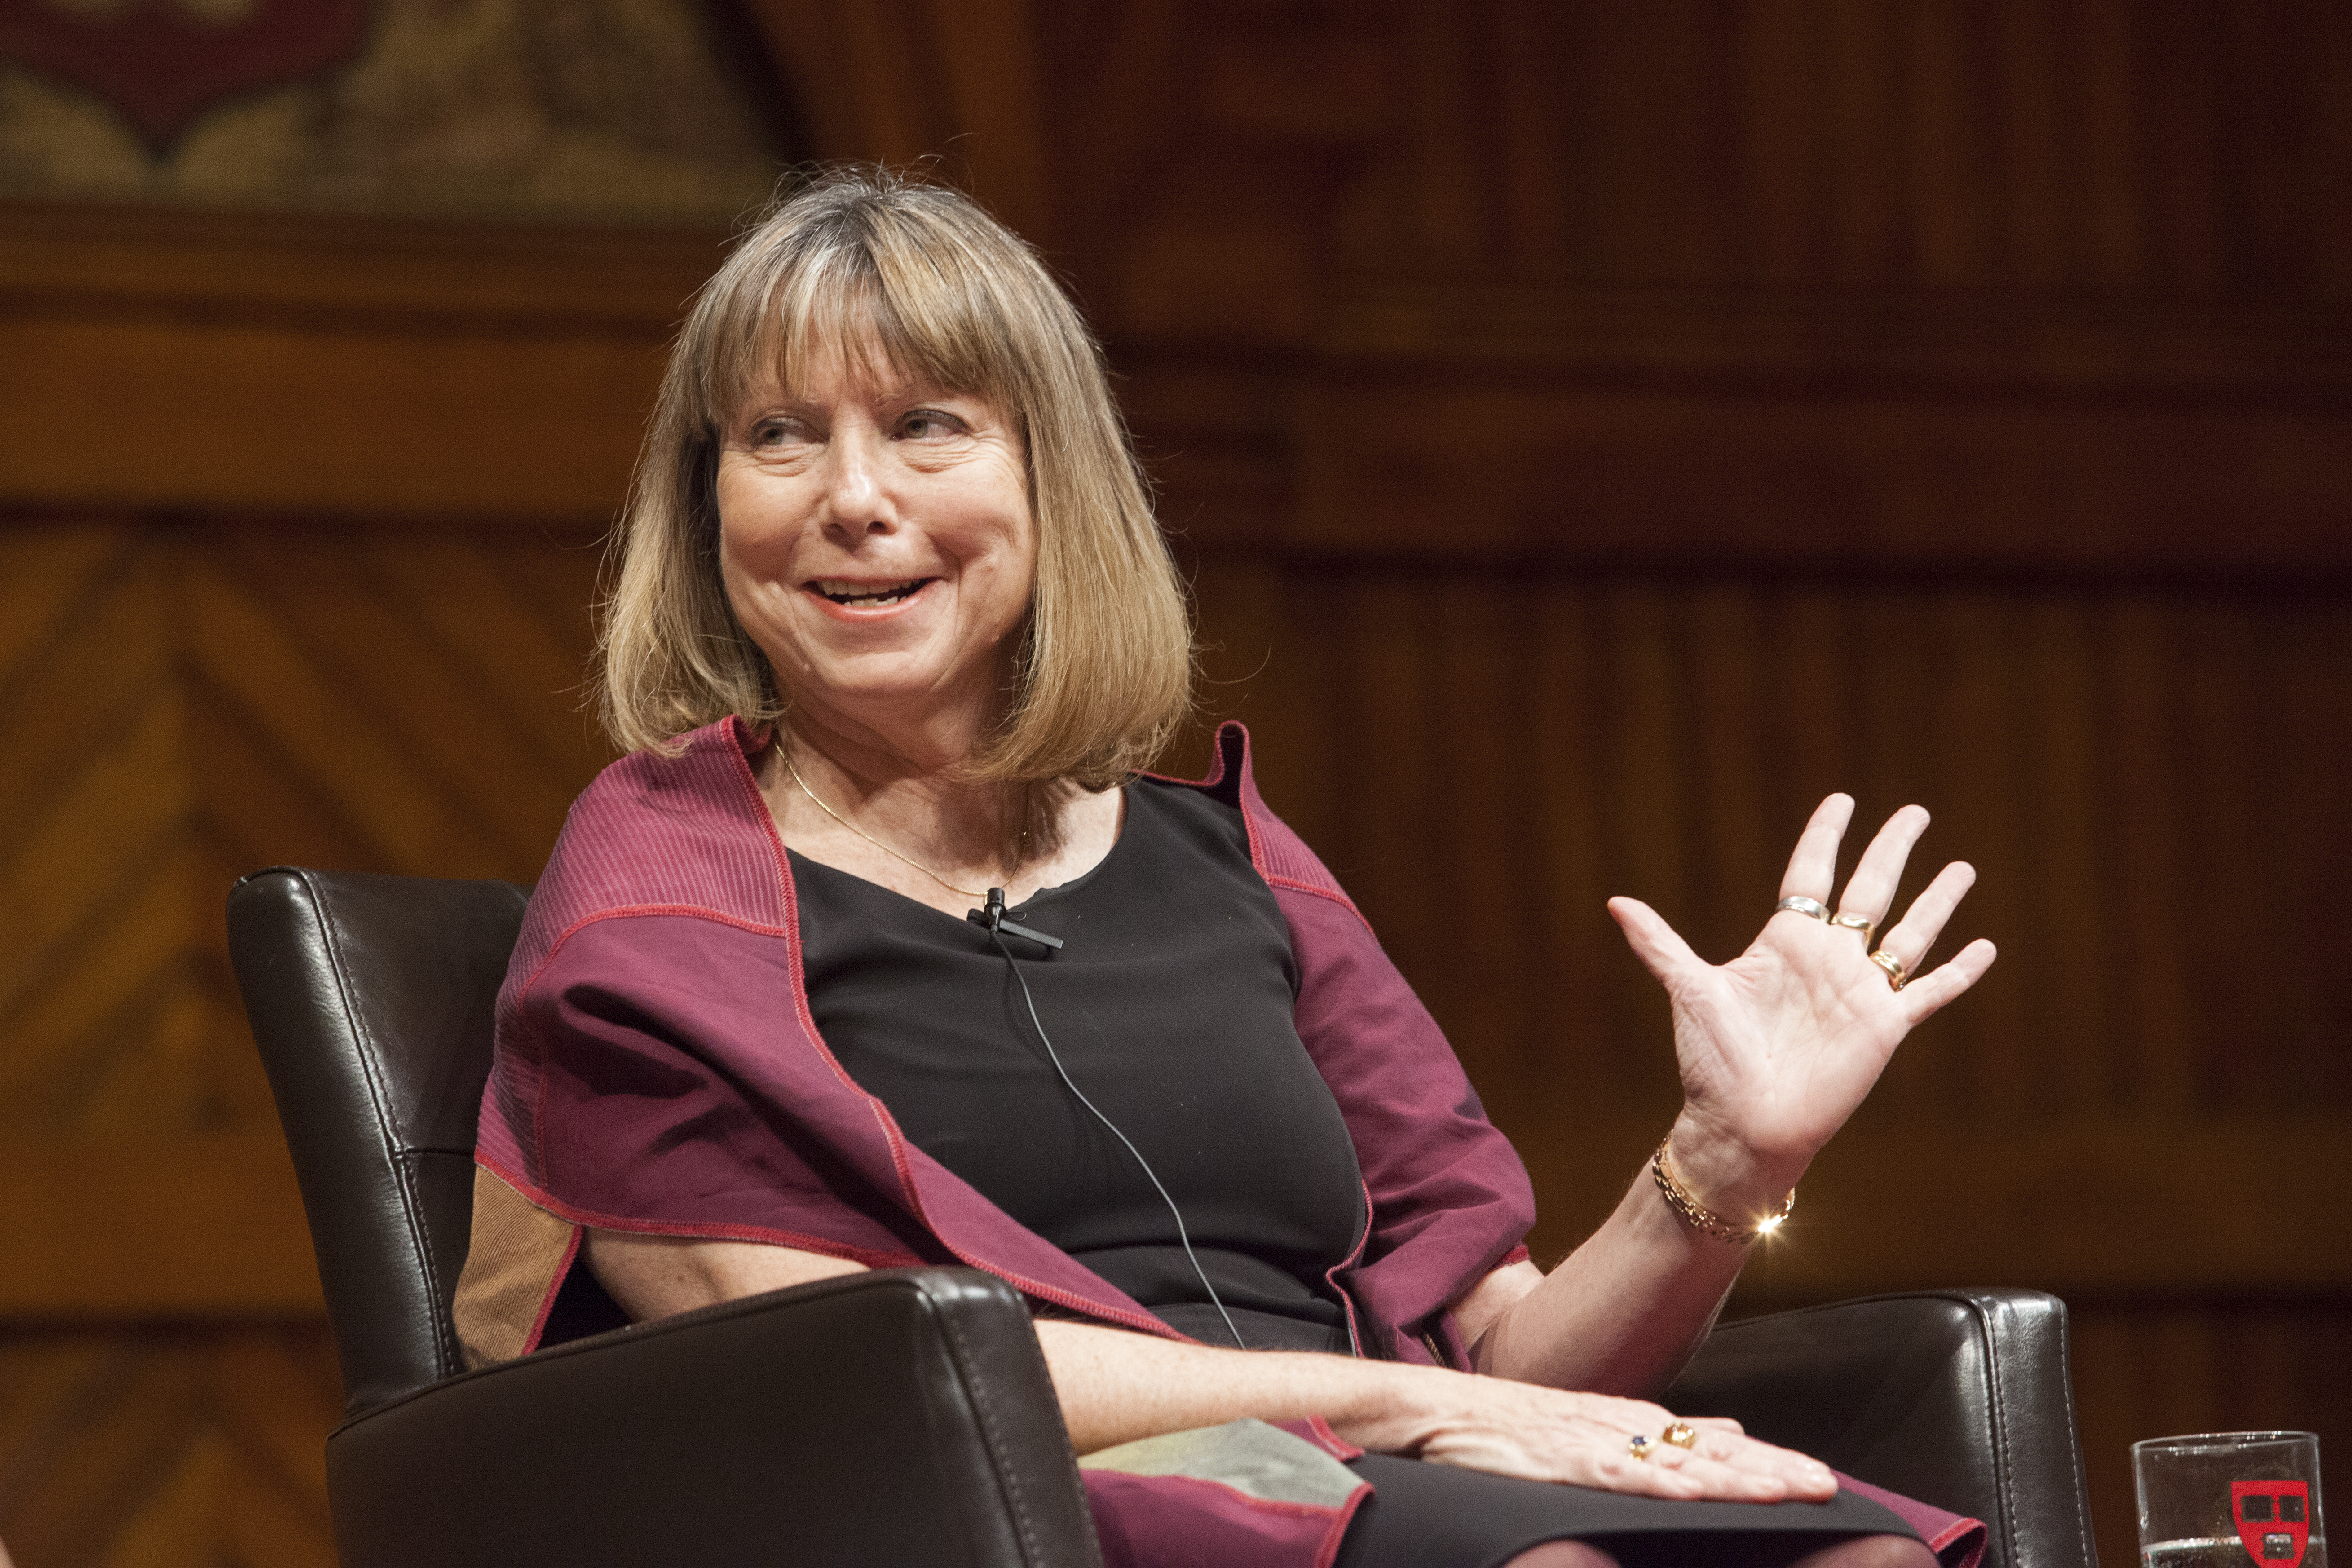 Jill Abramson spoke about women in leadership at an event in Harvard's Sanders Theatre in April, a month before she was fired as executive editor of The New York Times